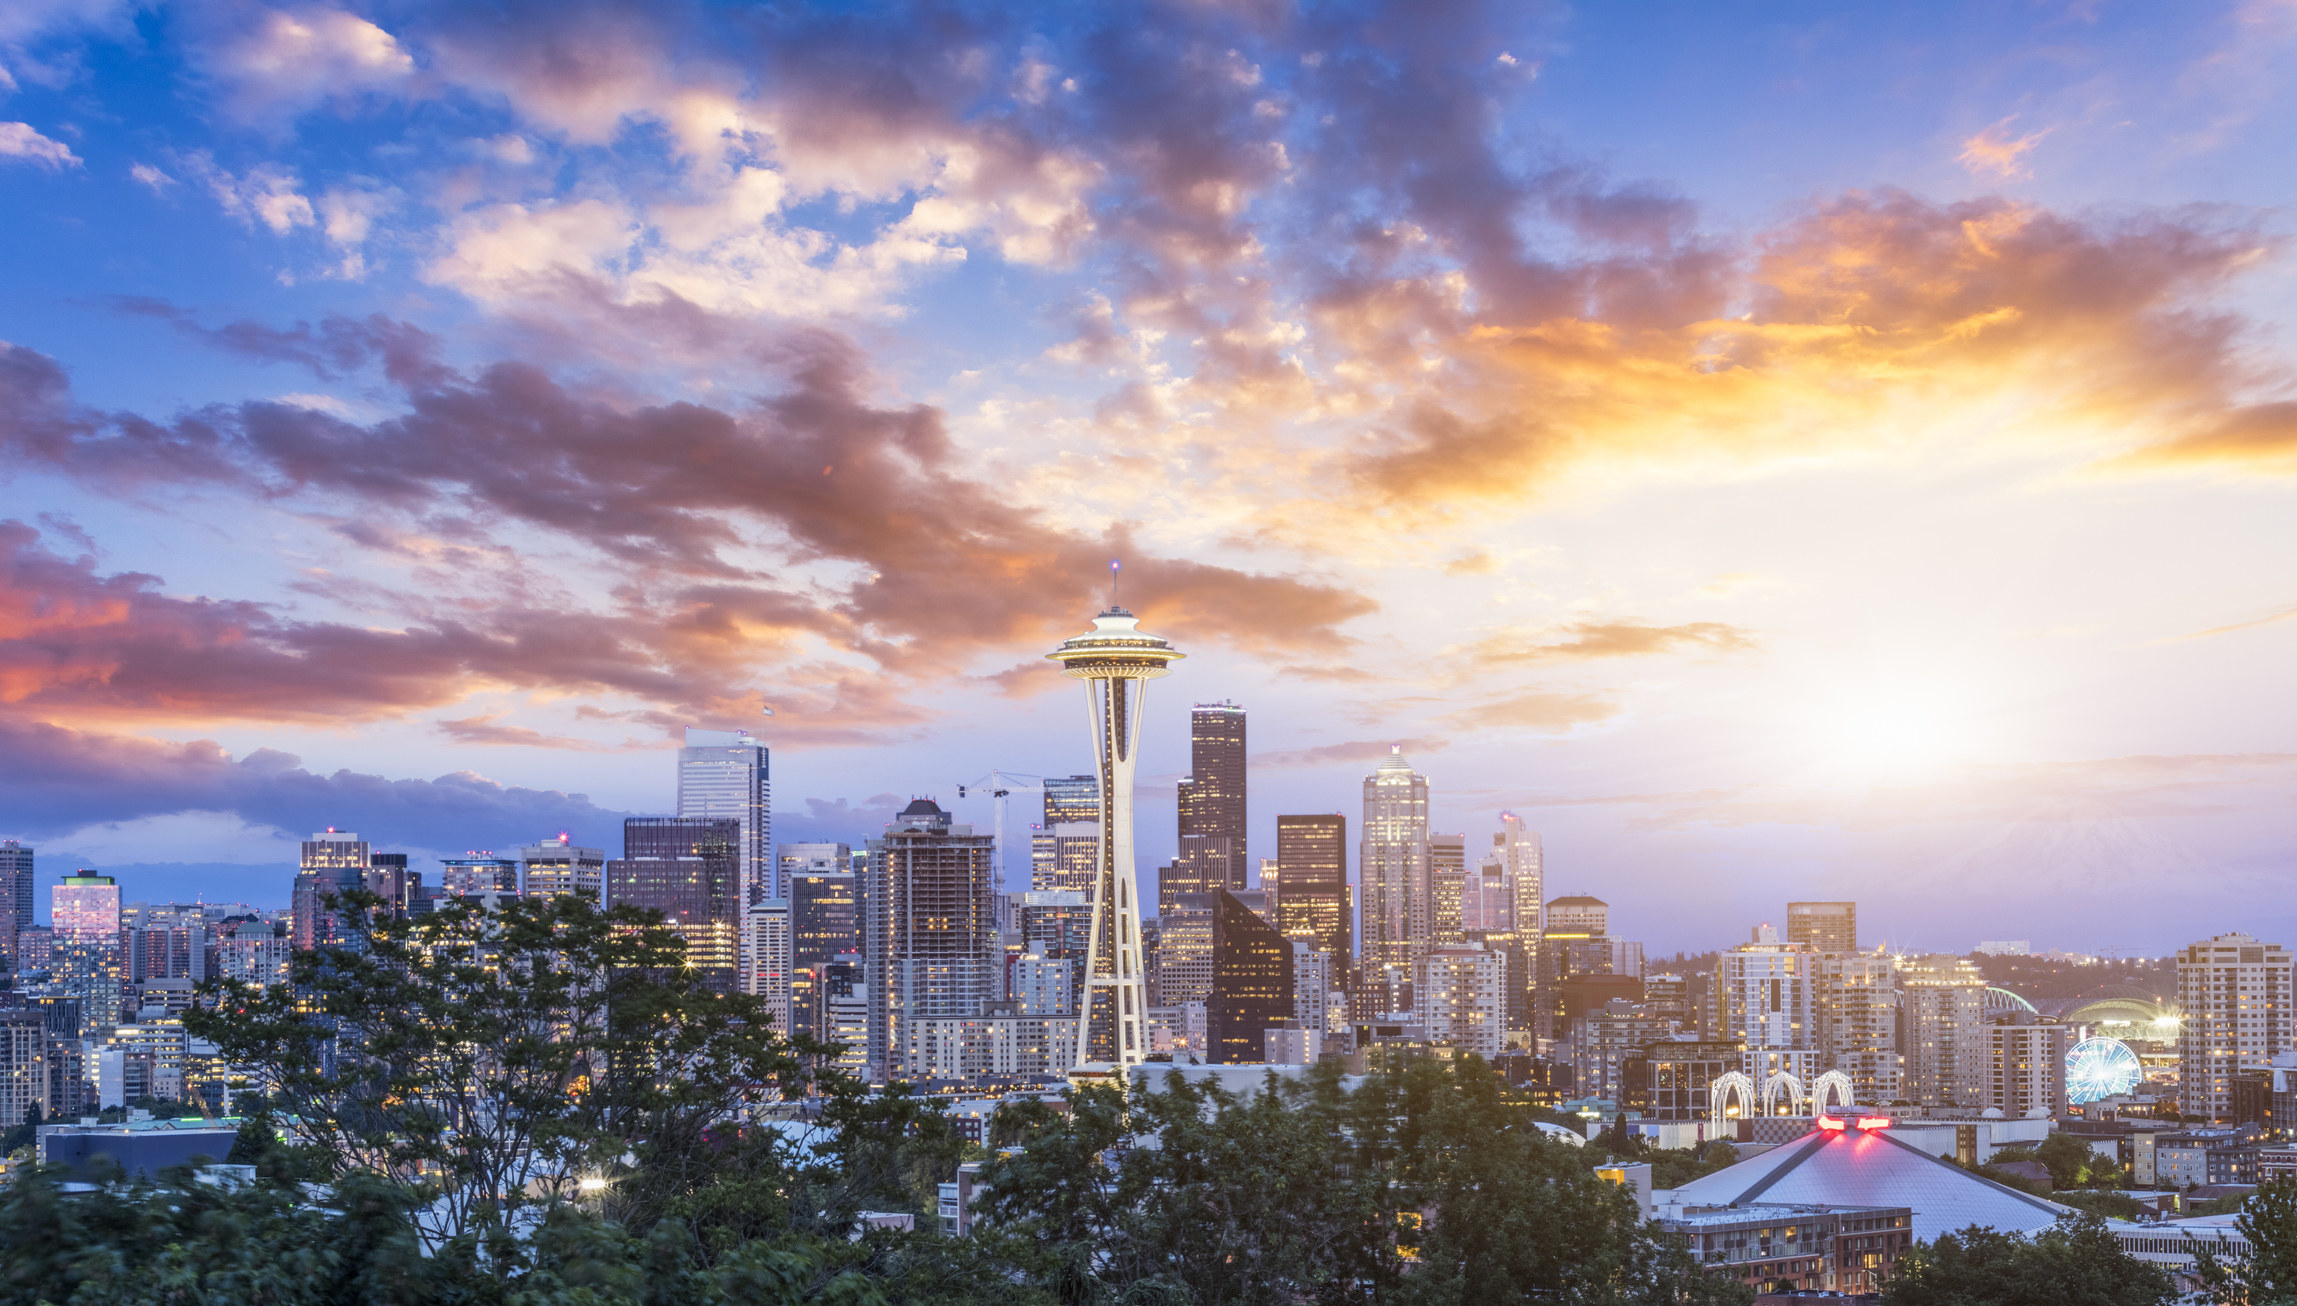 A view of Seattle at sunset.